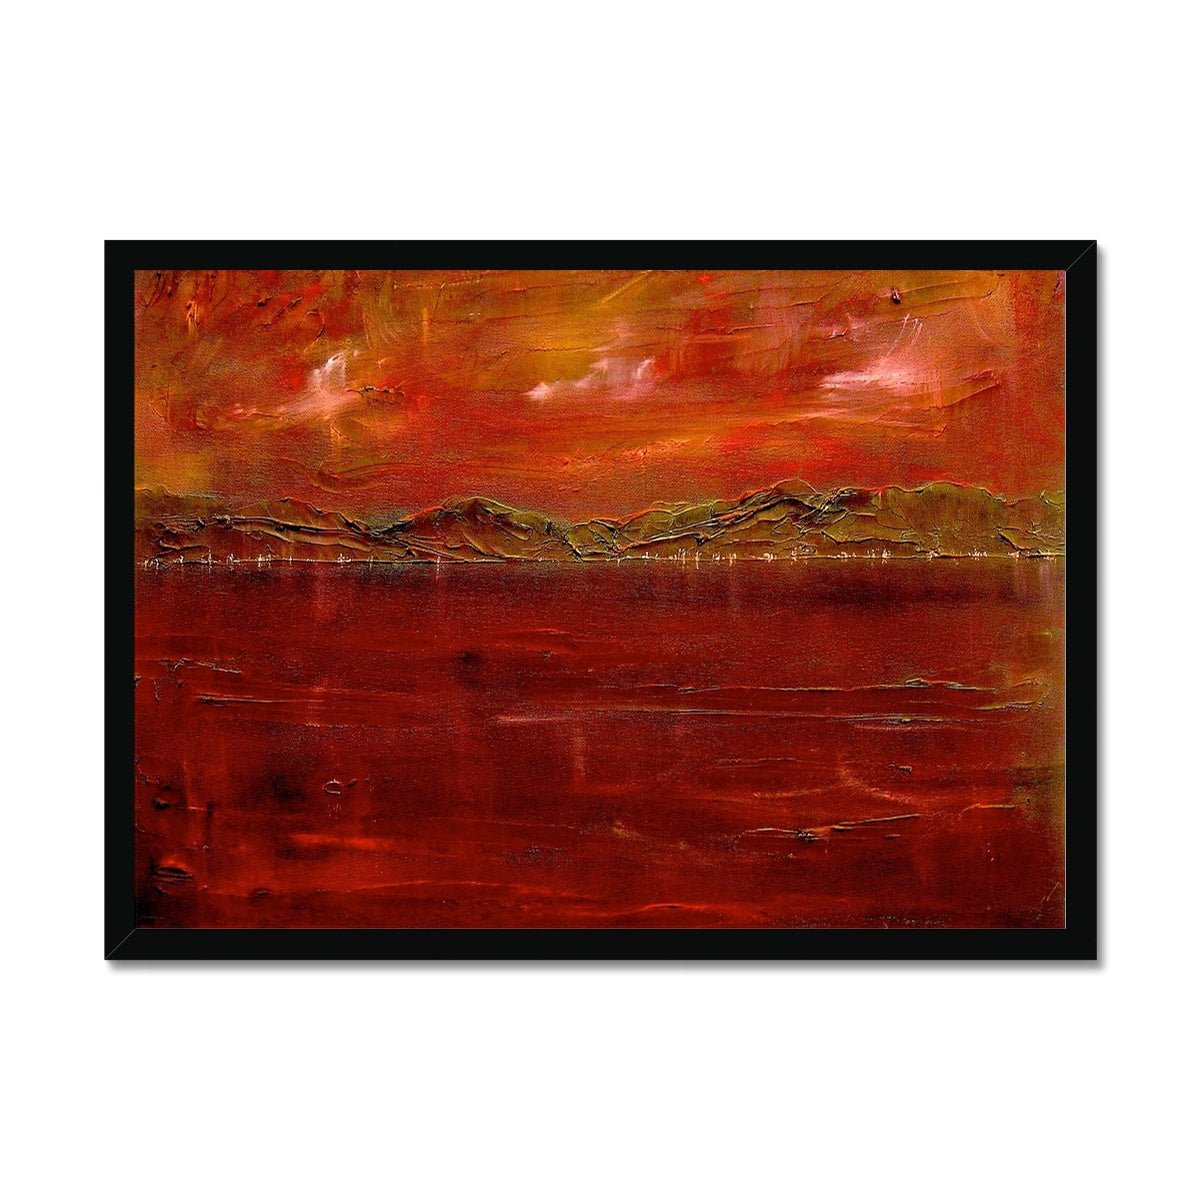 Deep Clyde Dusk Painting | Framed Prints From Scotland-Framed Prints-River Clyde Art Gallery-A2 Landscape-Black Frame-Paintings, Prints, Homeware, Art Gifts From Scotland By Scottish Artist Kevin Hunter